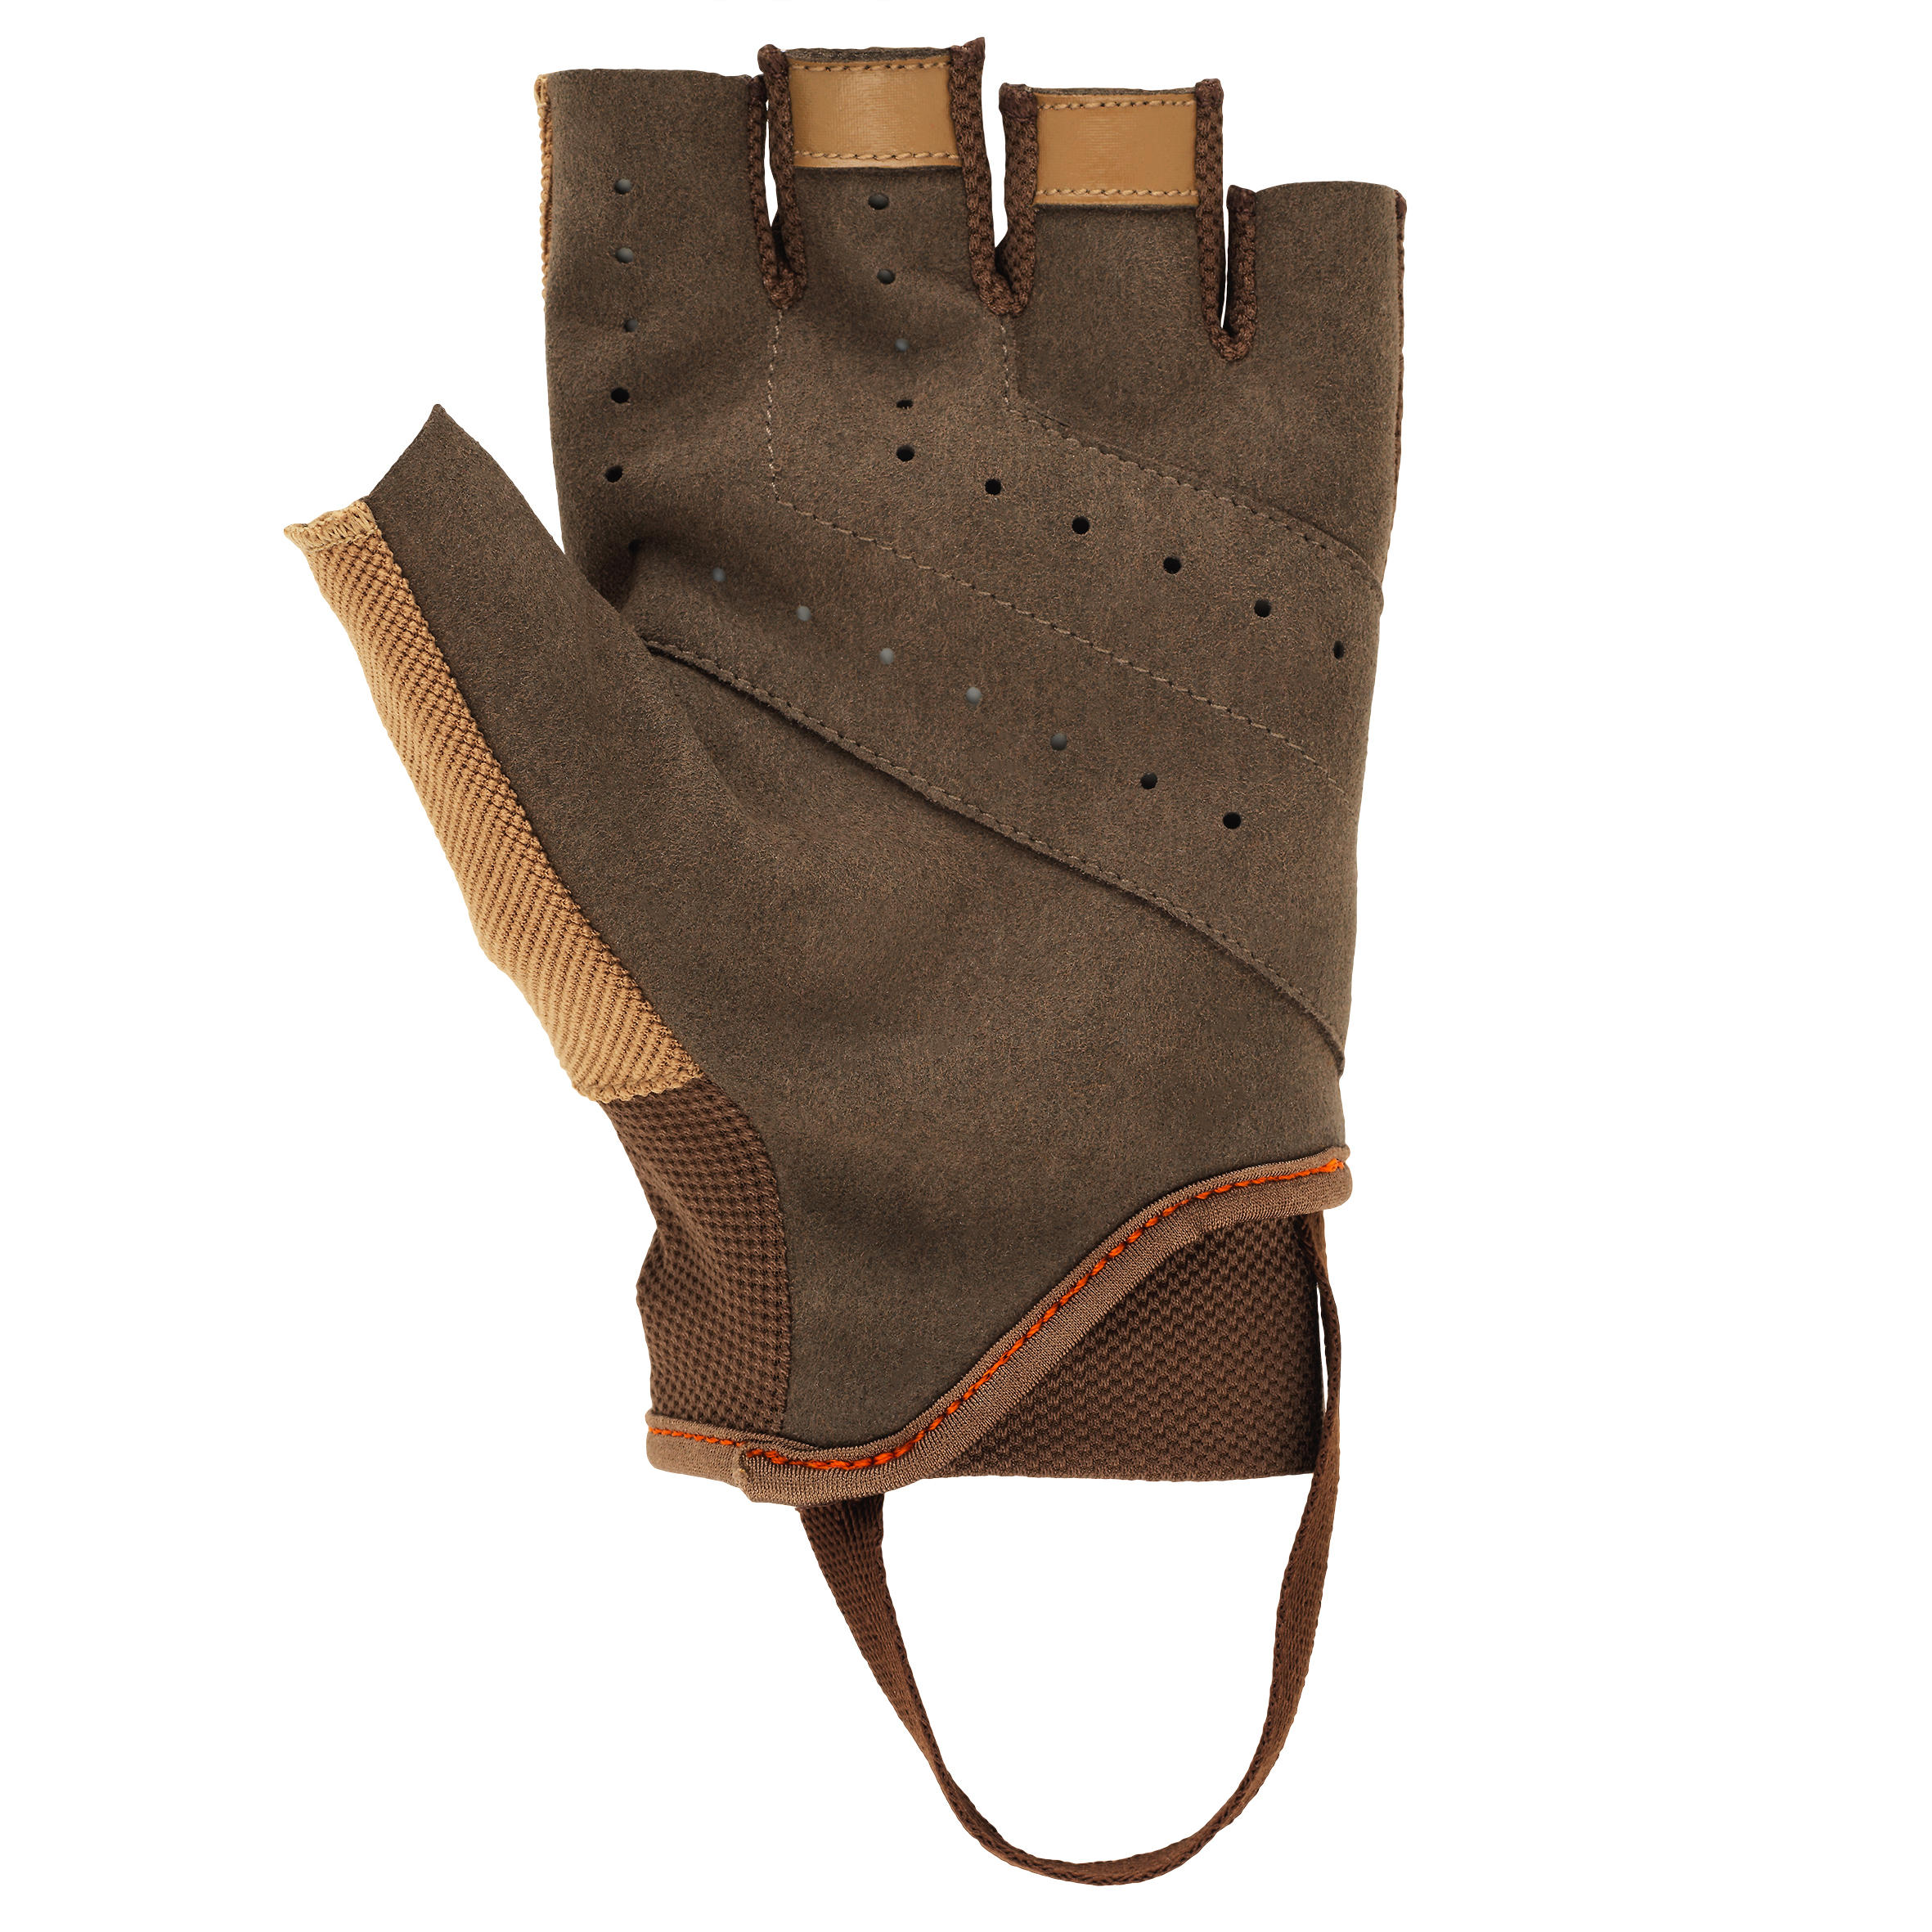 Clay Pigeon Shooting Mitts - Brown 2/4